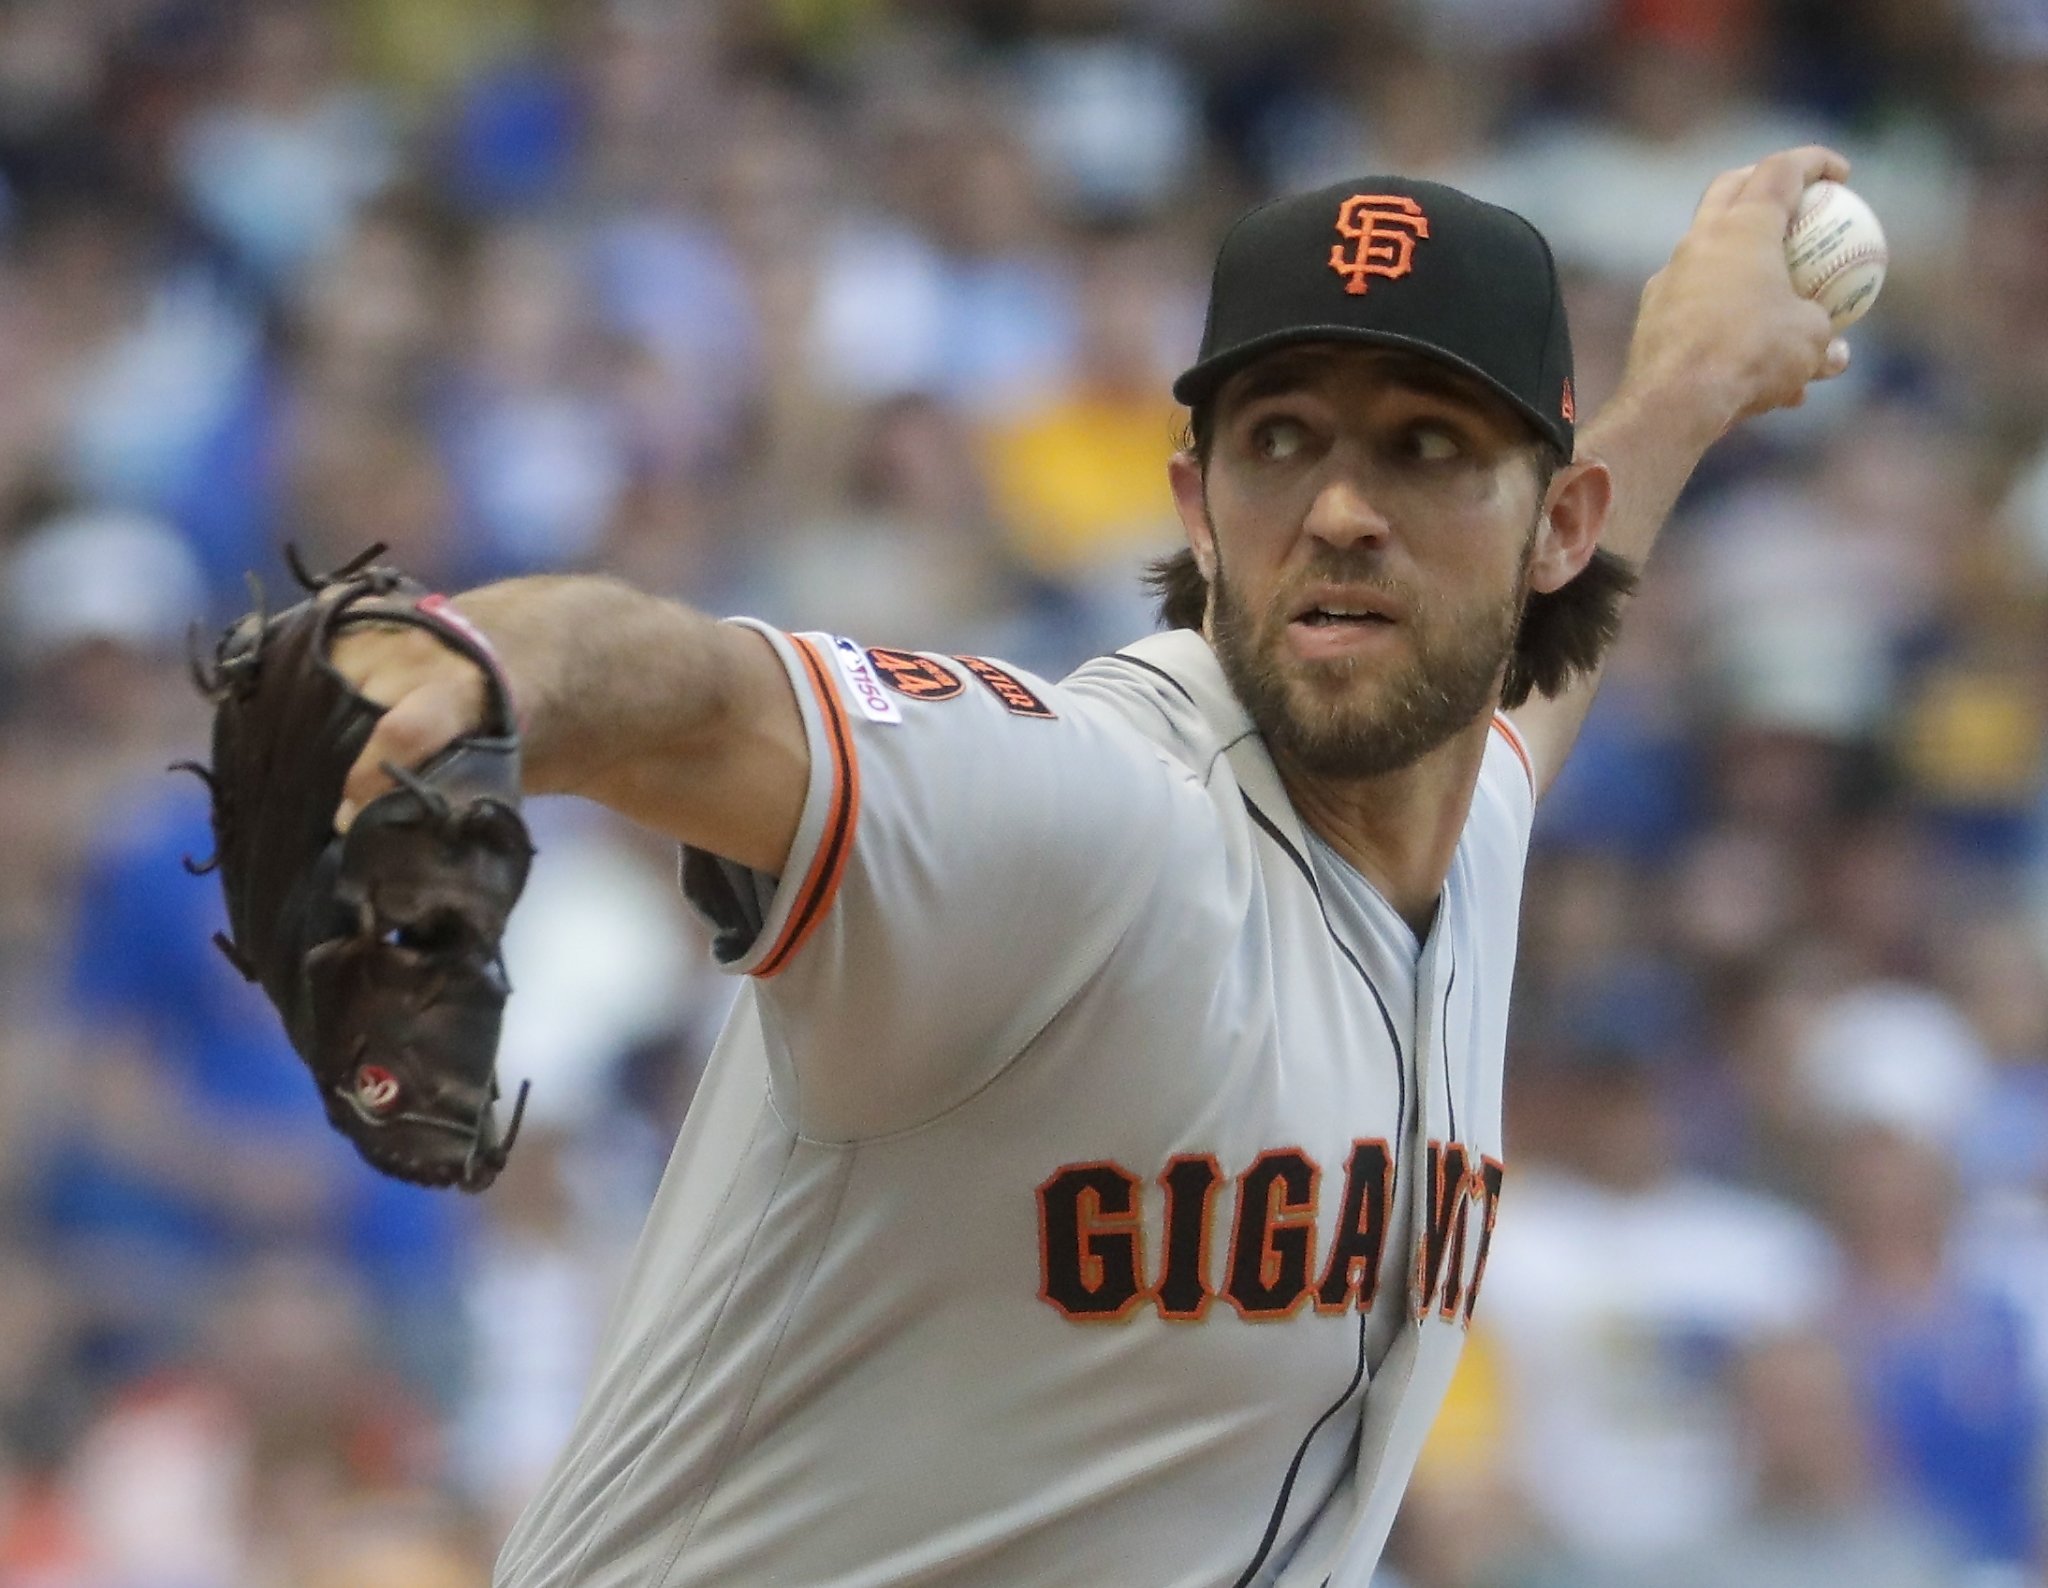 Madison Bumgarner and Buster Posey by Jamie Squire